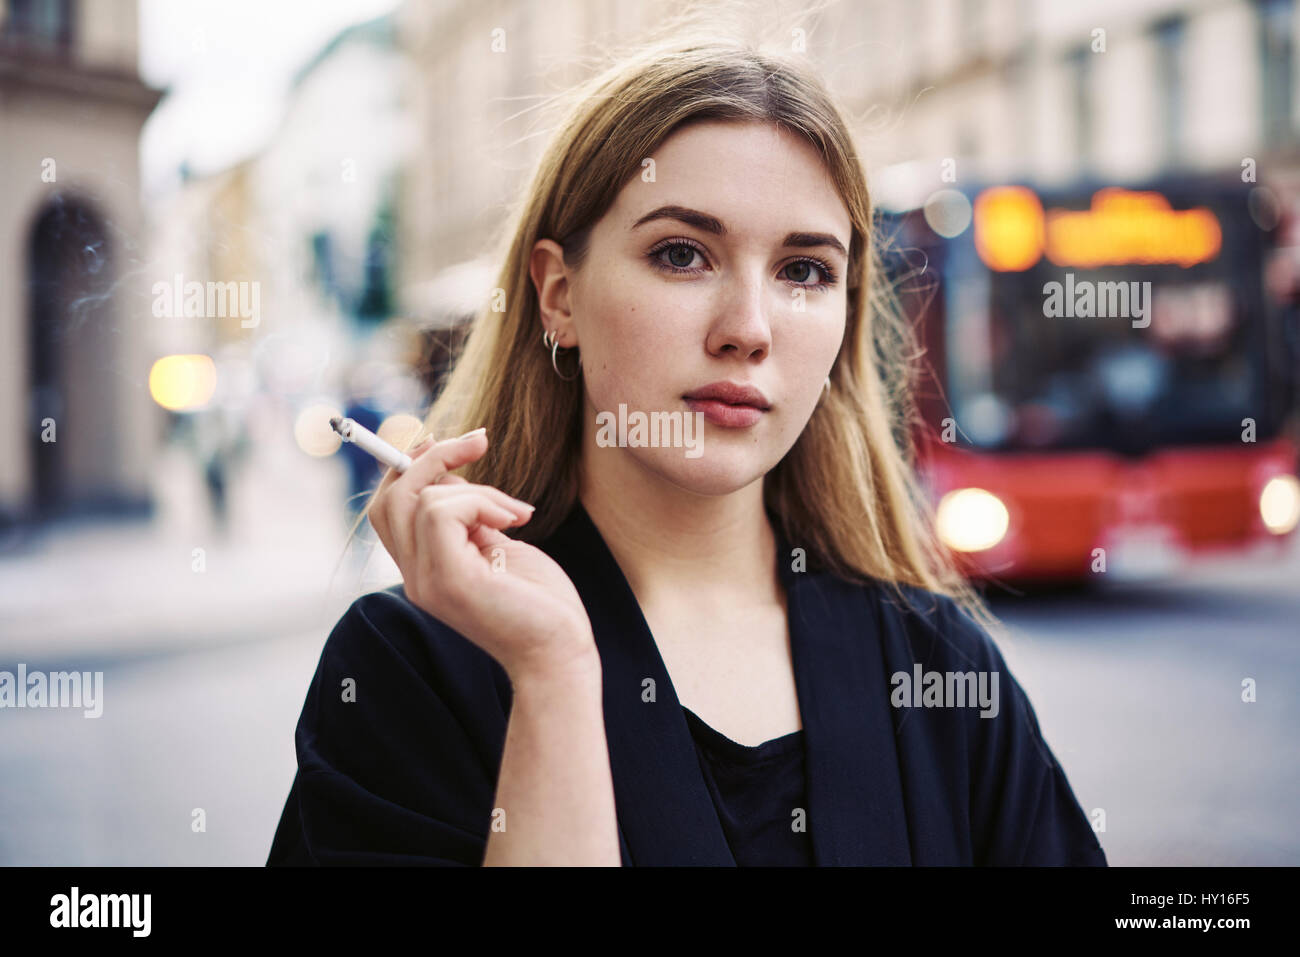 Sweden, Uppland, Stockholm, Kungsholmen, Portrait of young woman smoking in street Stock Photo